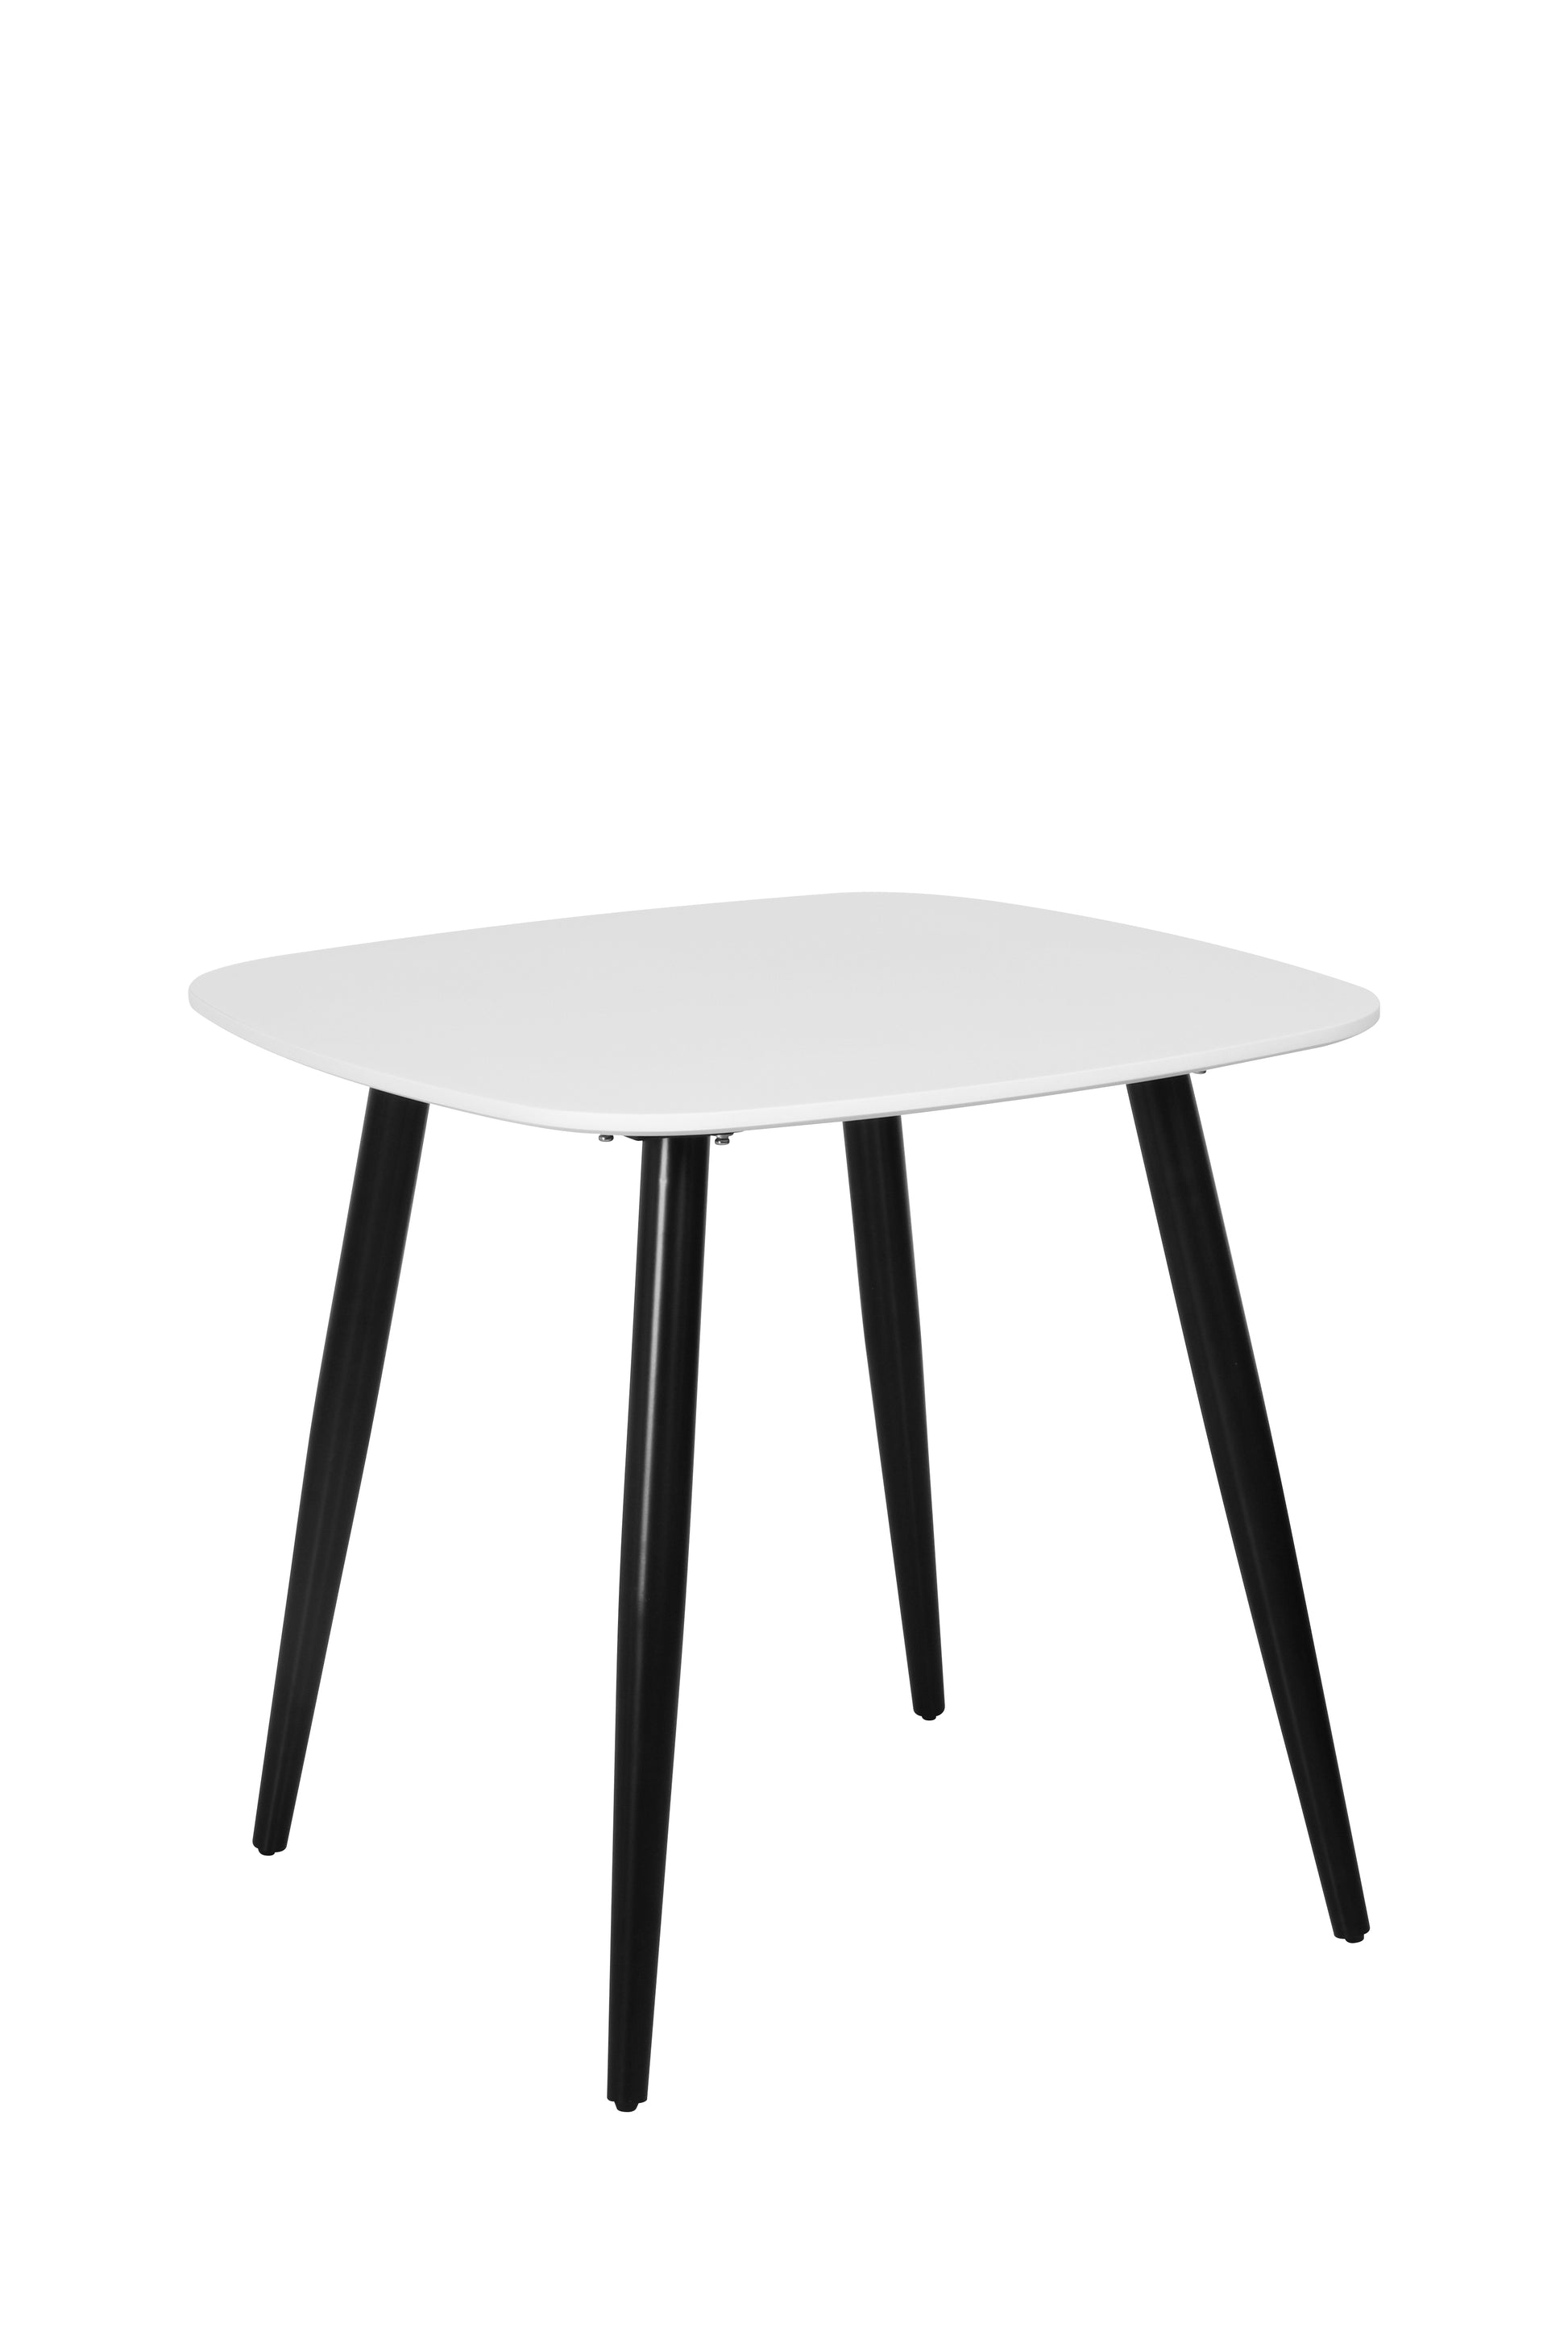 Contemporary square dining table, with black tapered legs